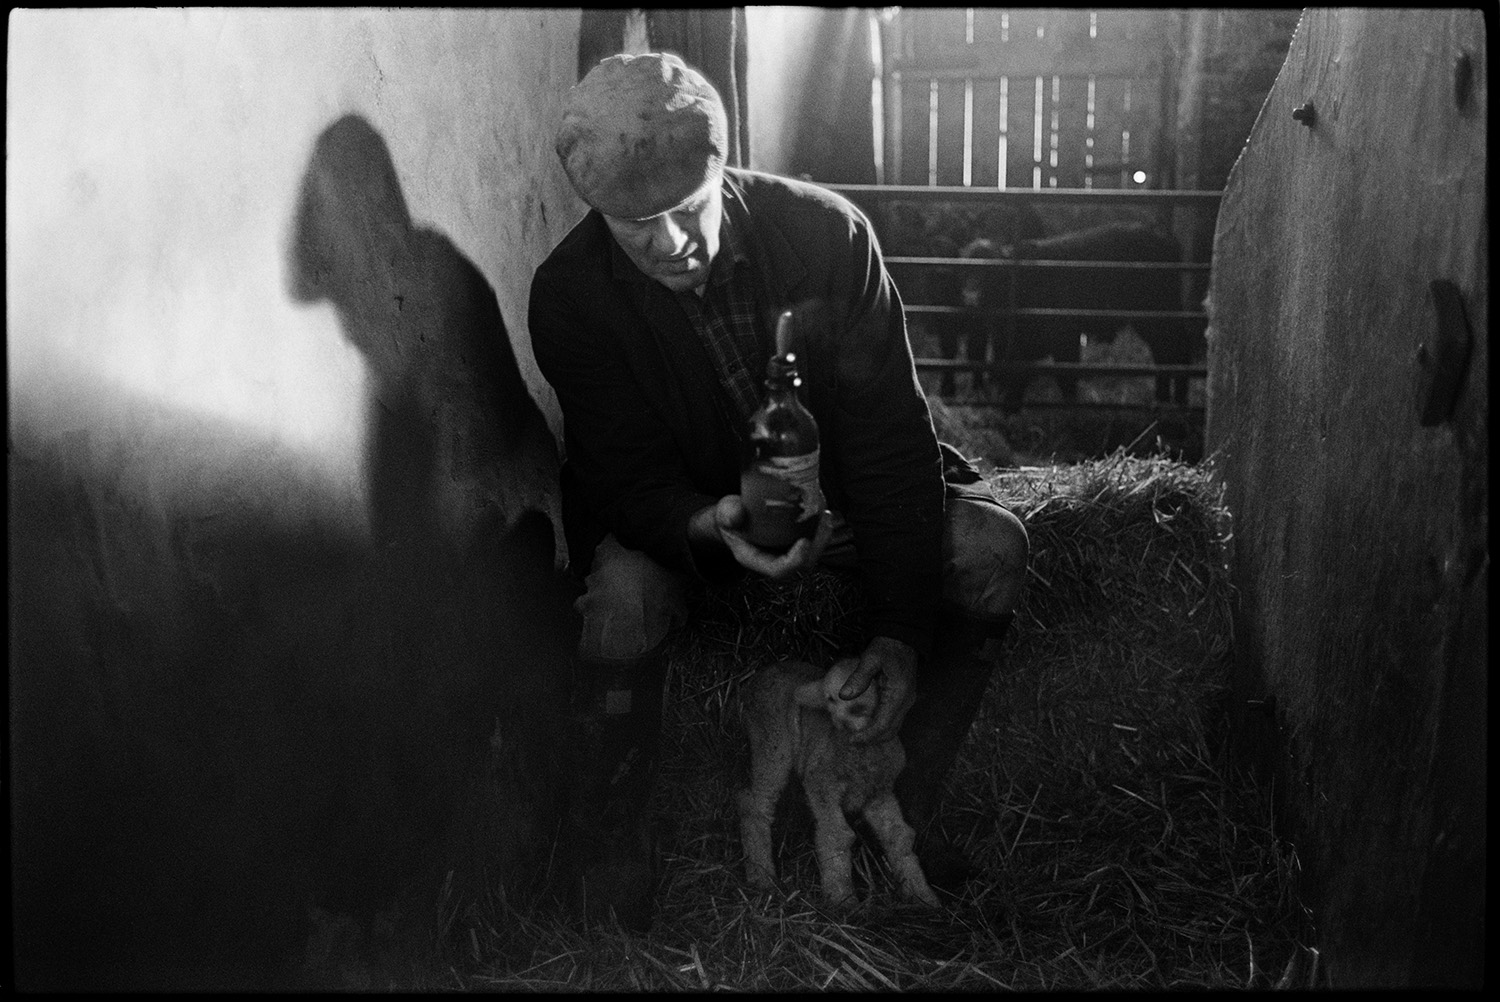 Sheep in orchard, farmyard and bottle feeding lamb in barn.
[Alf Pugsley, sitting on straw bales, bottle feeding a lamb in a barn at Lower Langham, Dolton. Two calves can be seen behind a metal gate in the background.]